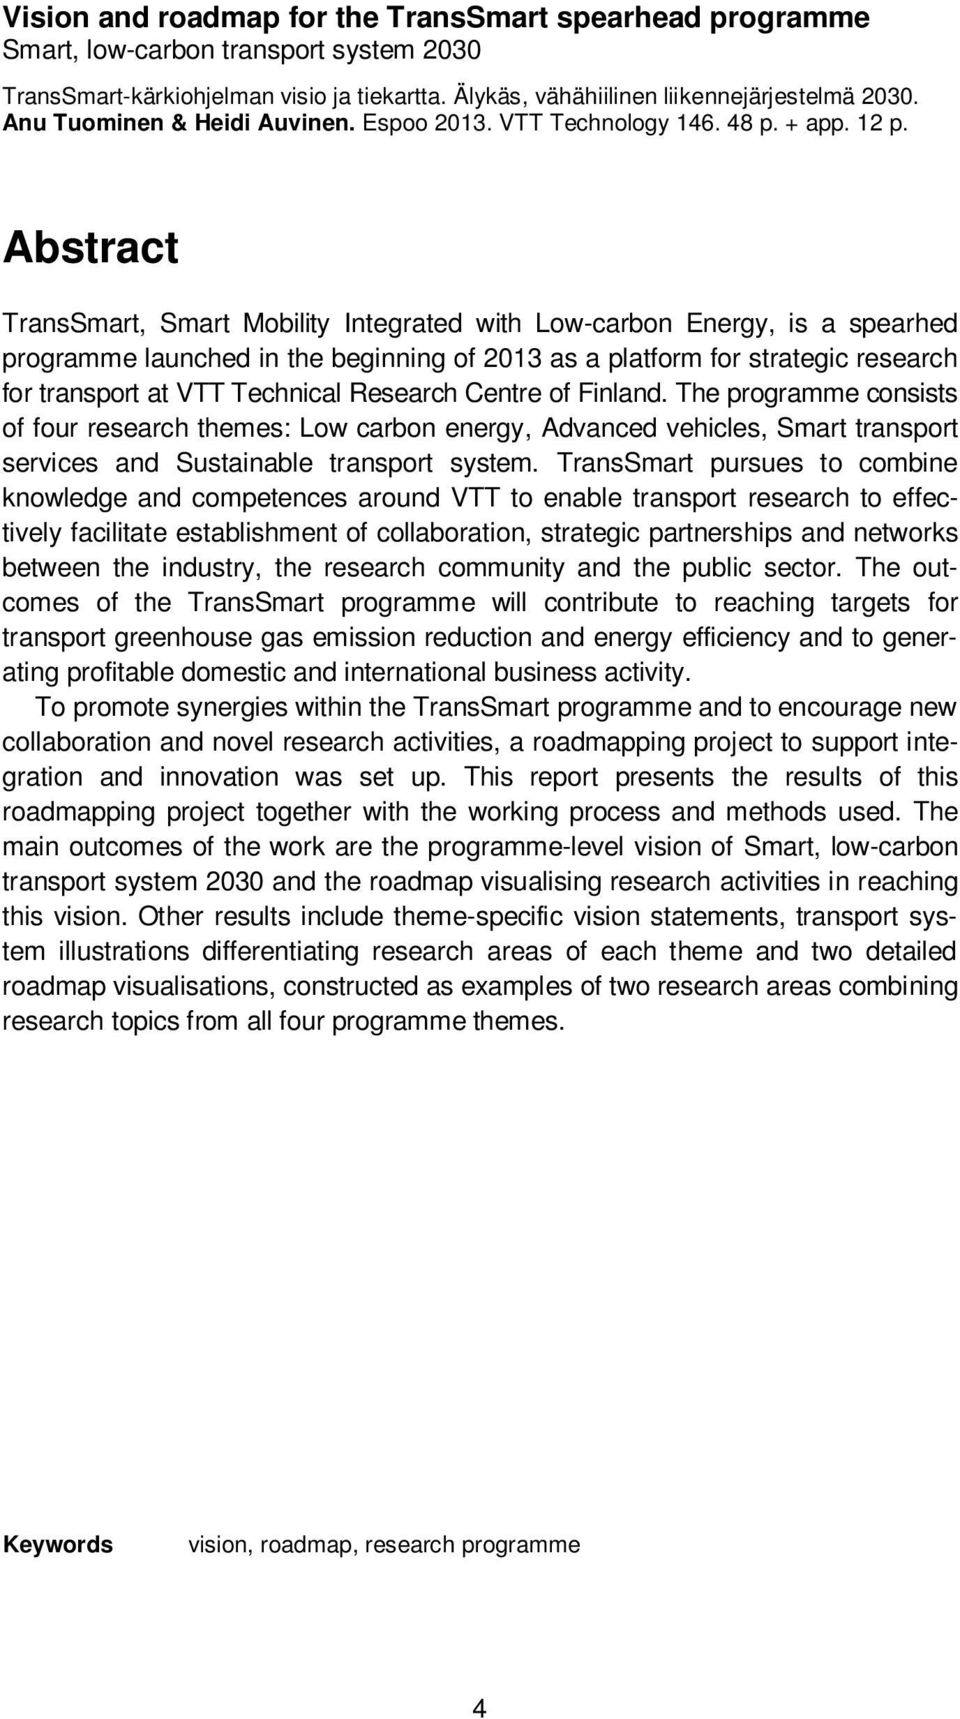 Abstract TransSmart, Smart Mobility Integrated with Low-carbon Energy, is a spearhed programme launched in the beginning of 2013 as a platform for strategic research for transport at VTT Technical